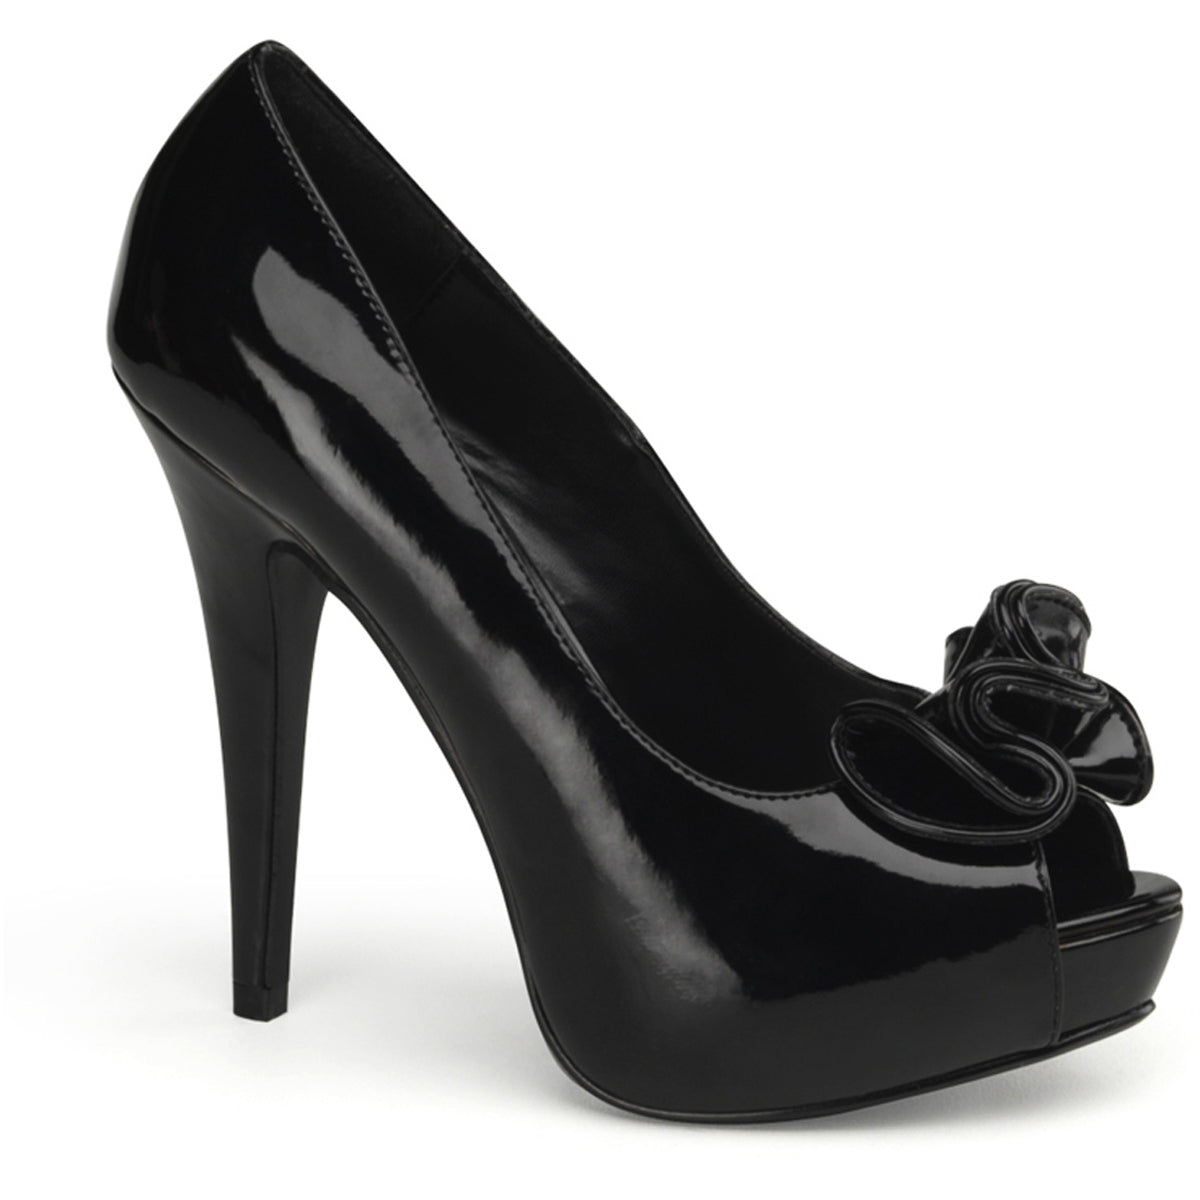 Sexy Ruffled Peep Toe Platform Stiletto Pumps High Heels Shoes Pleaser Pin Up Couture LOLITA/10